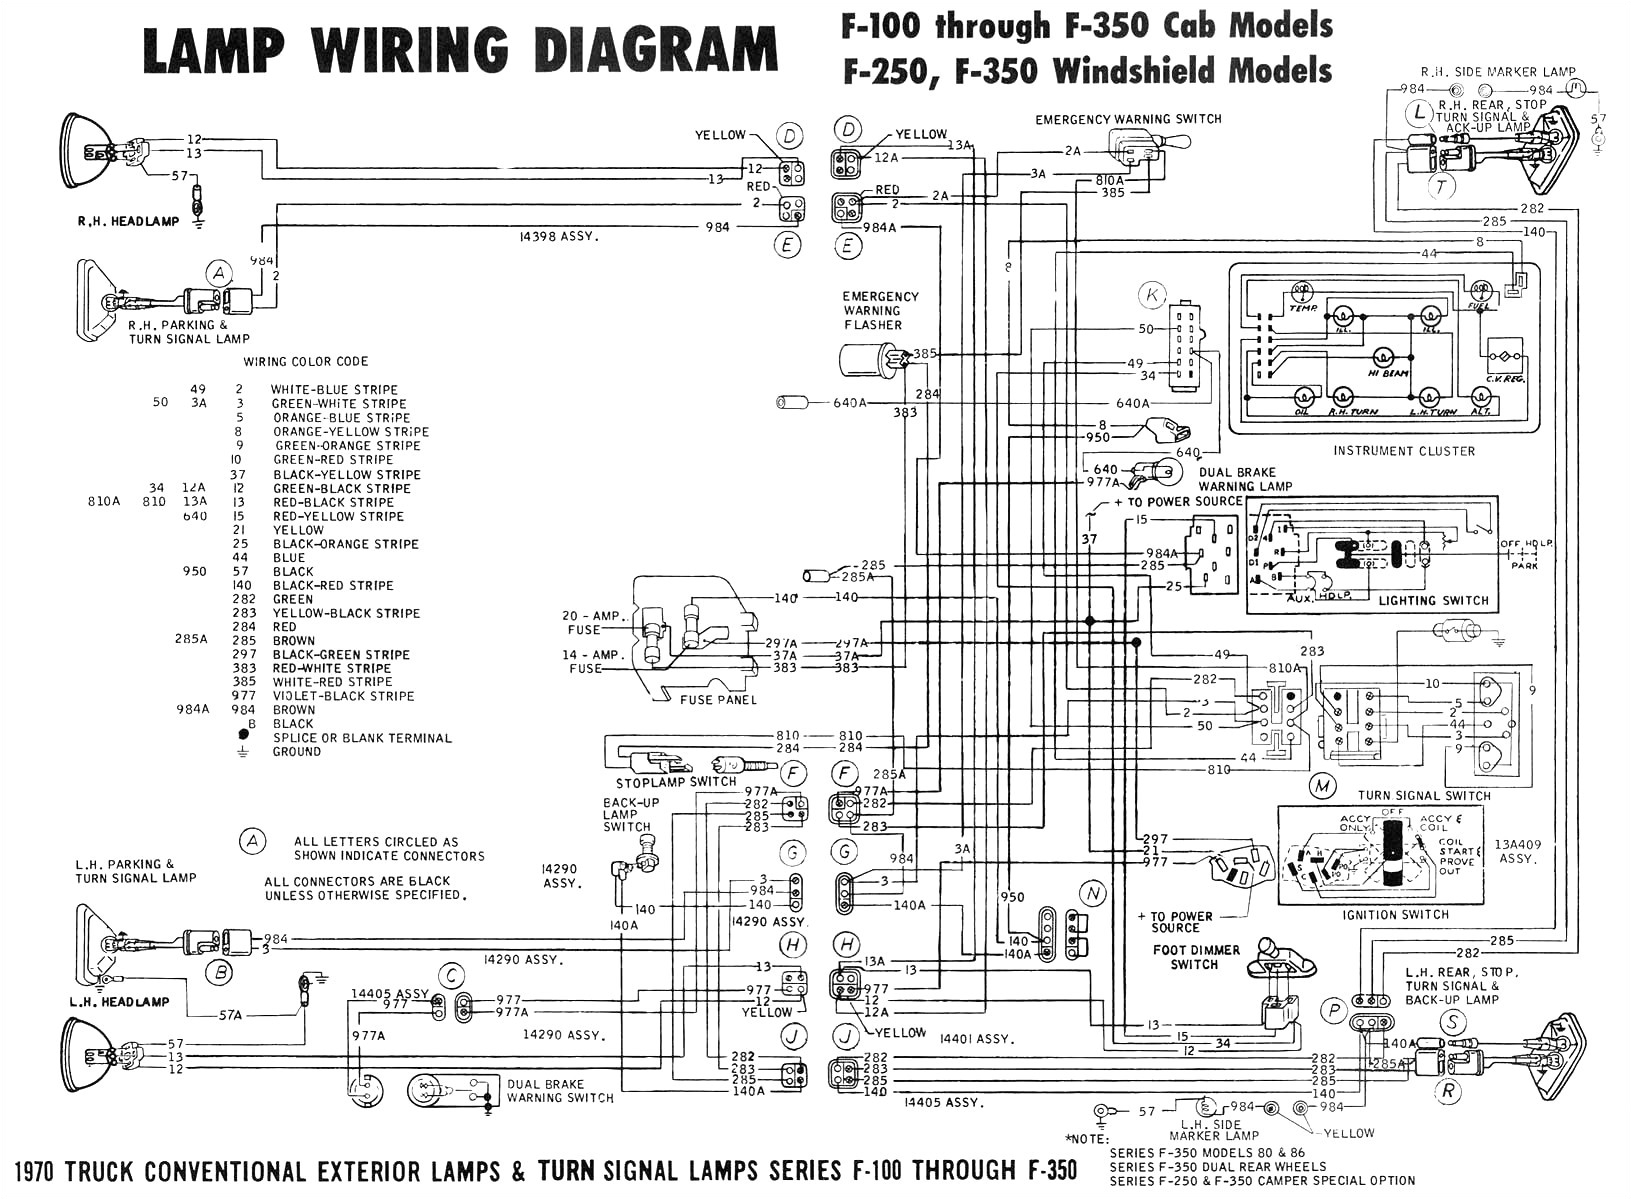 wiring diagram likewise 2002 jeep wrangler heater get free image 2004 jeep grand cherokee turn signal diagram as well jeep wrangler tj